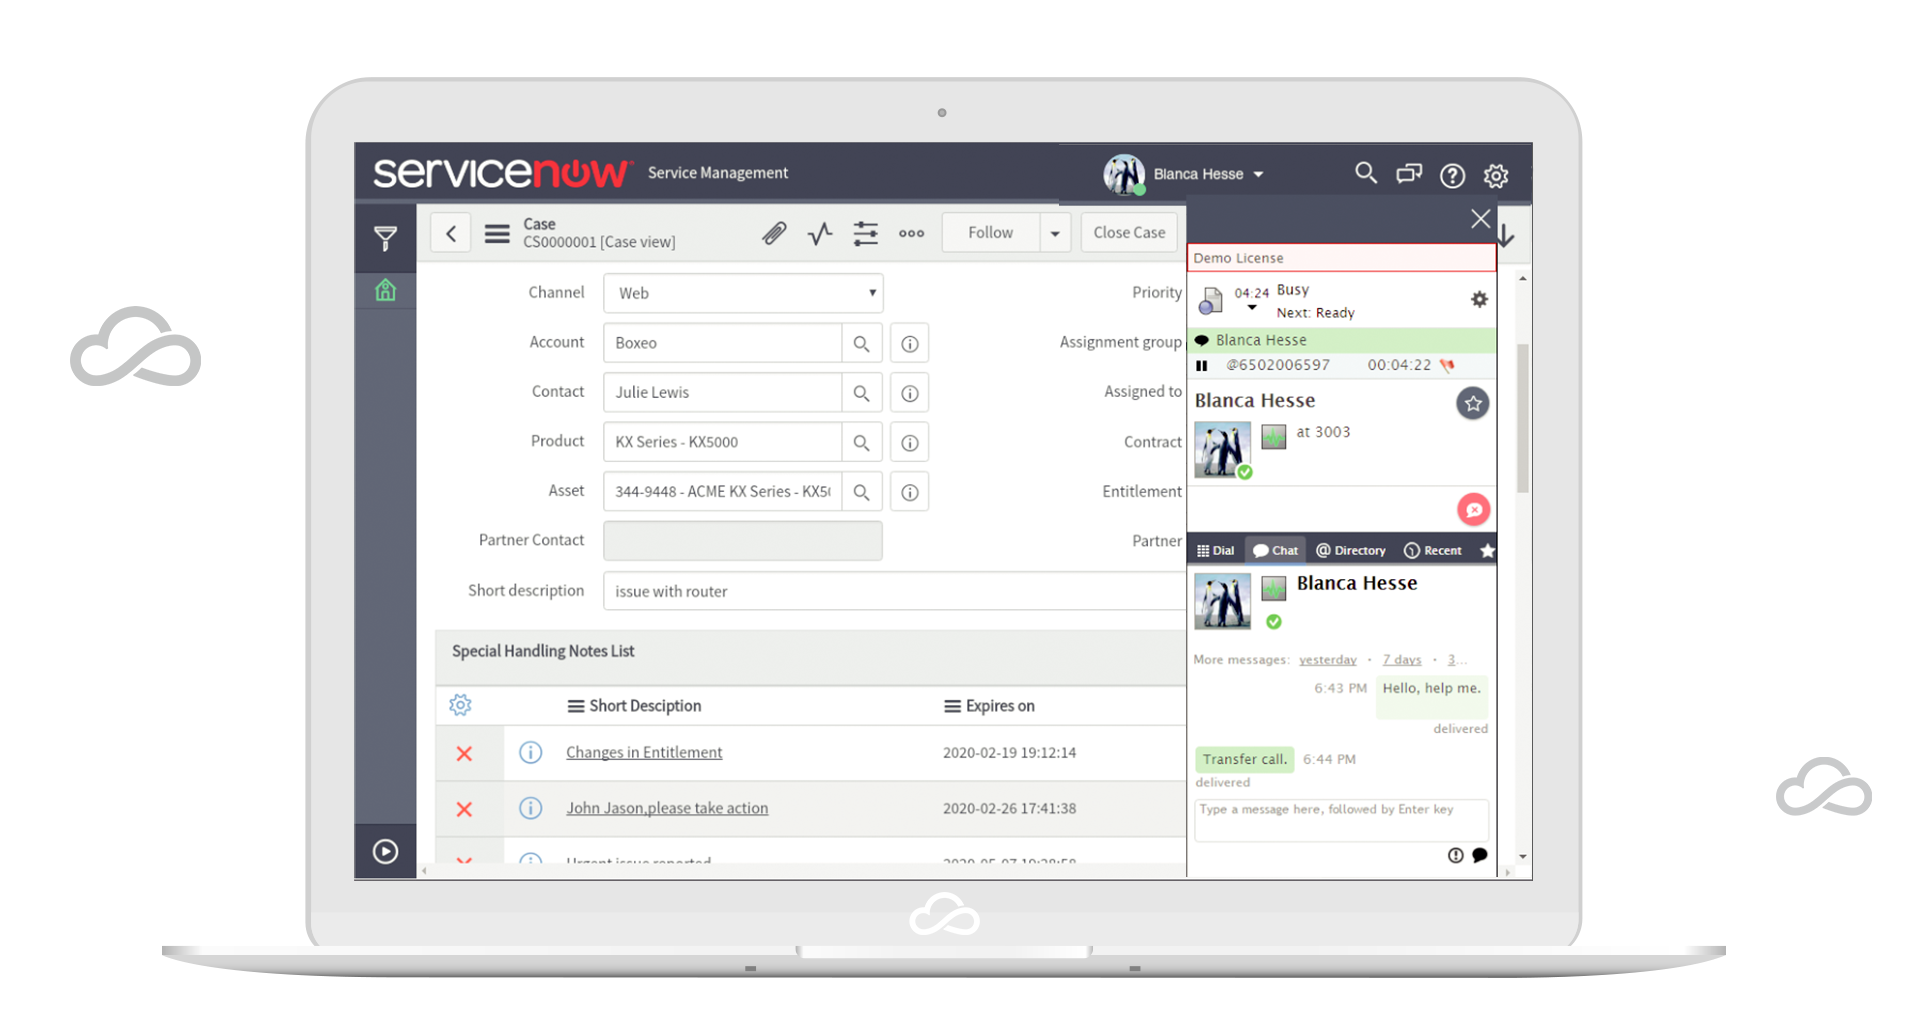 BeInContact Software - ServiceNow Integration